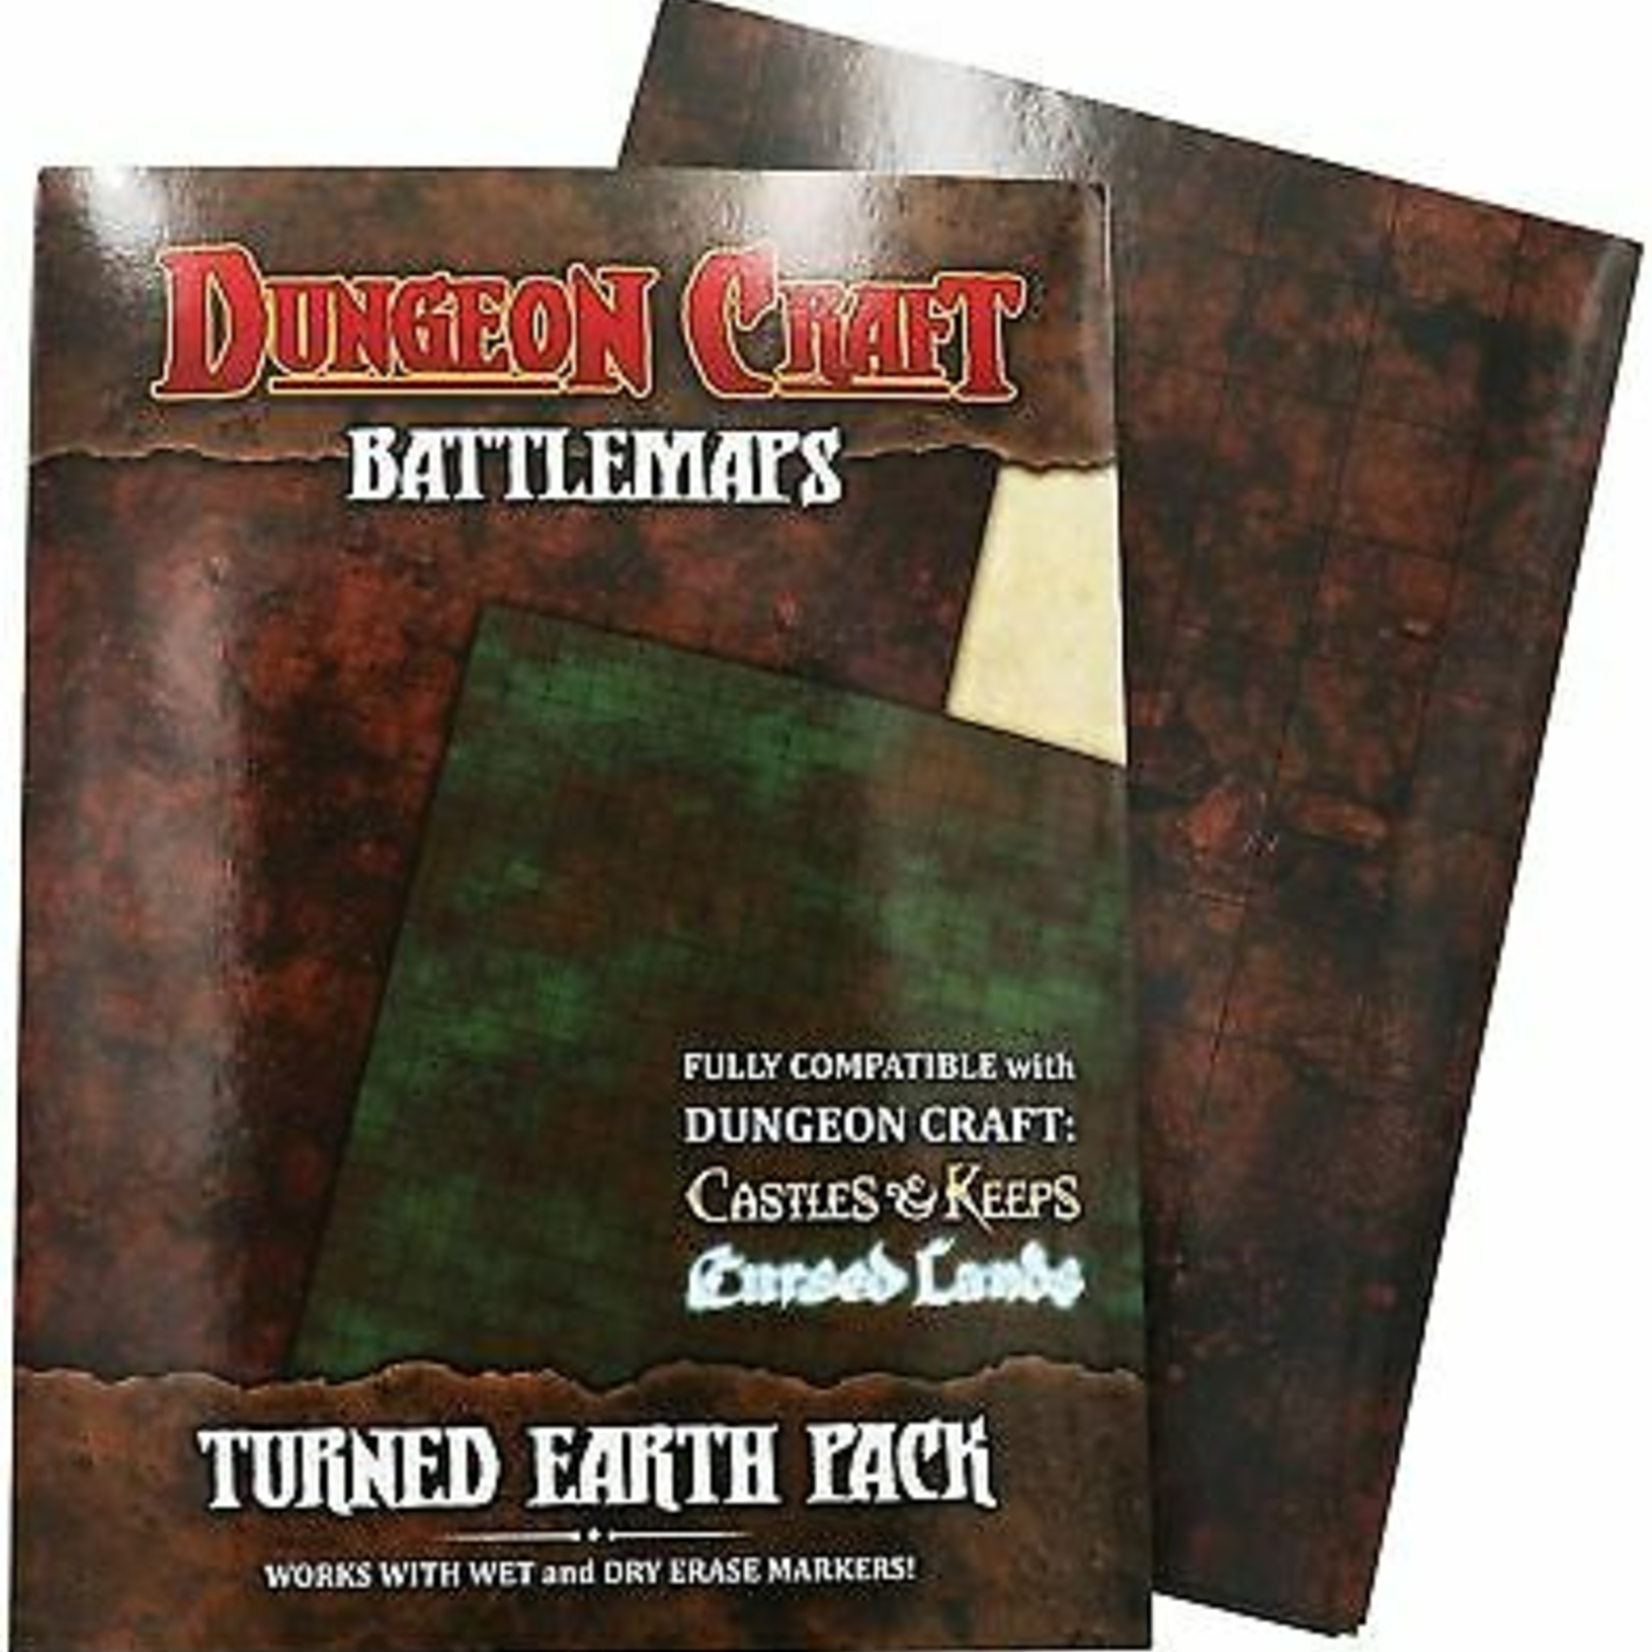 1985 Games Dungeon Craft Battle Maps Turned Earth Pack